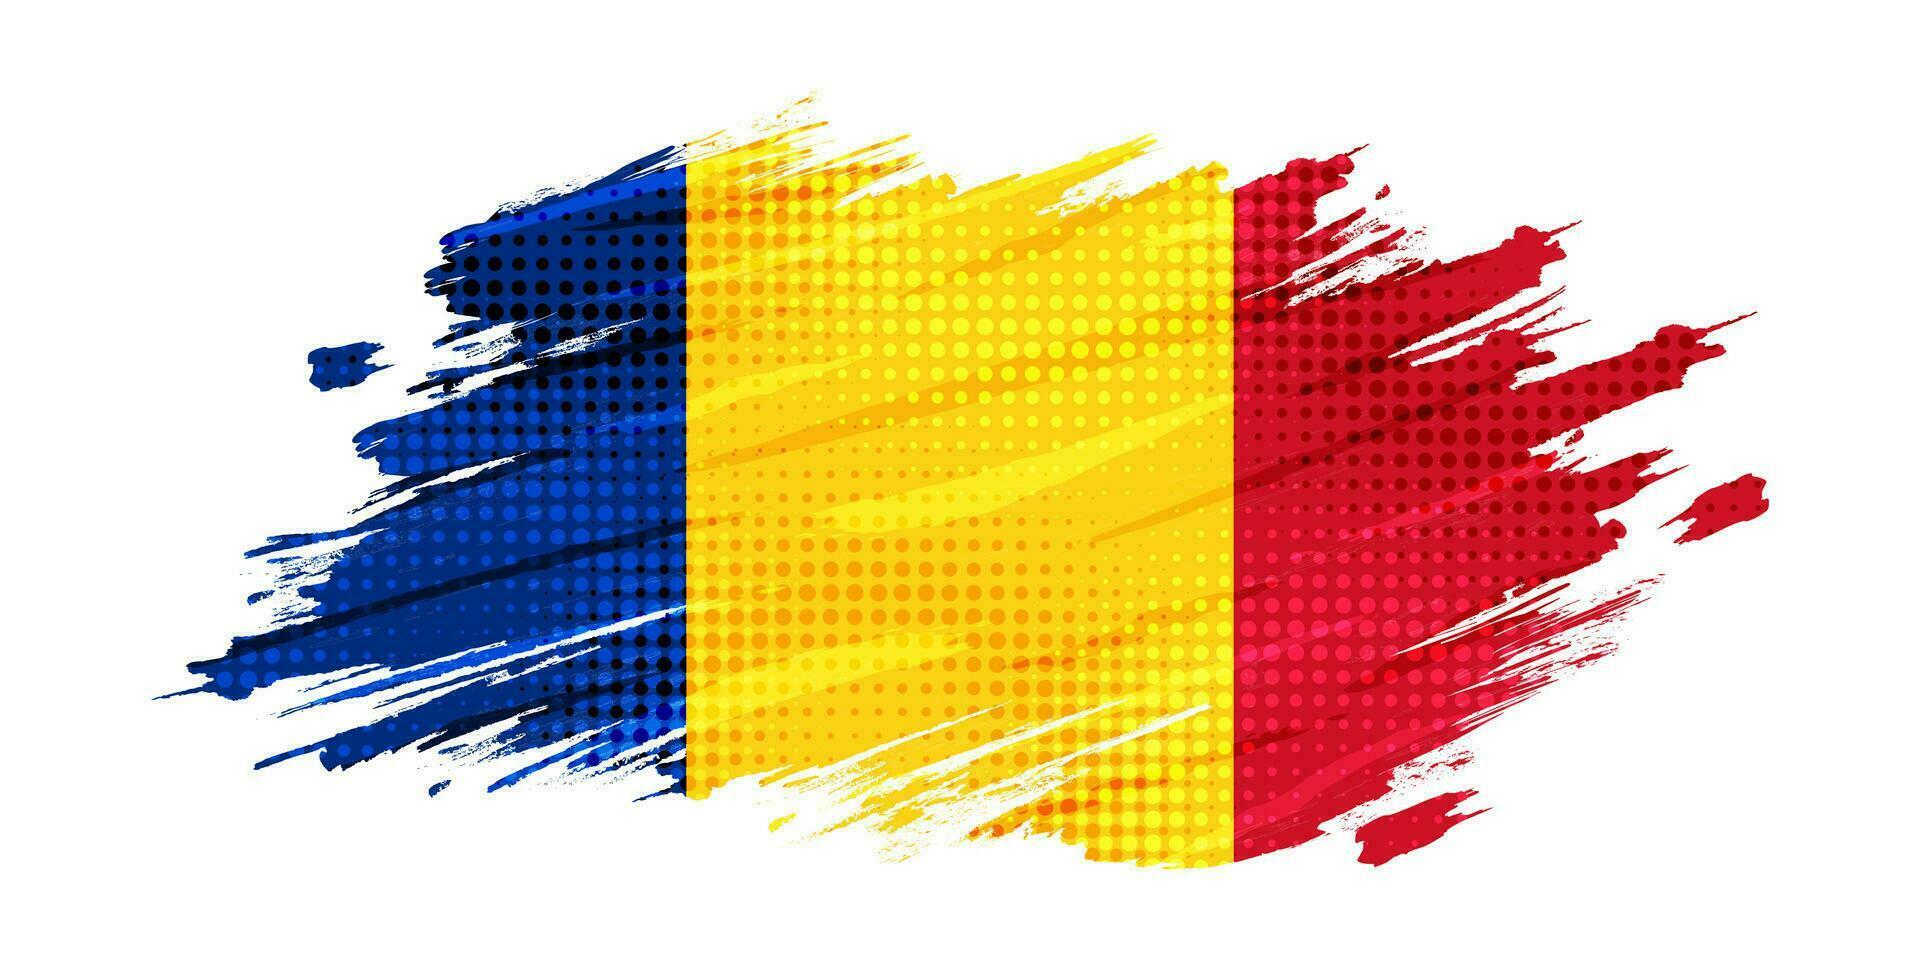 Romania  Flag with Brush Stroke Style Isolated on White Background. Flag of Romania vector